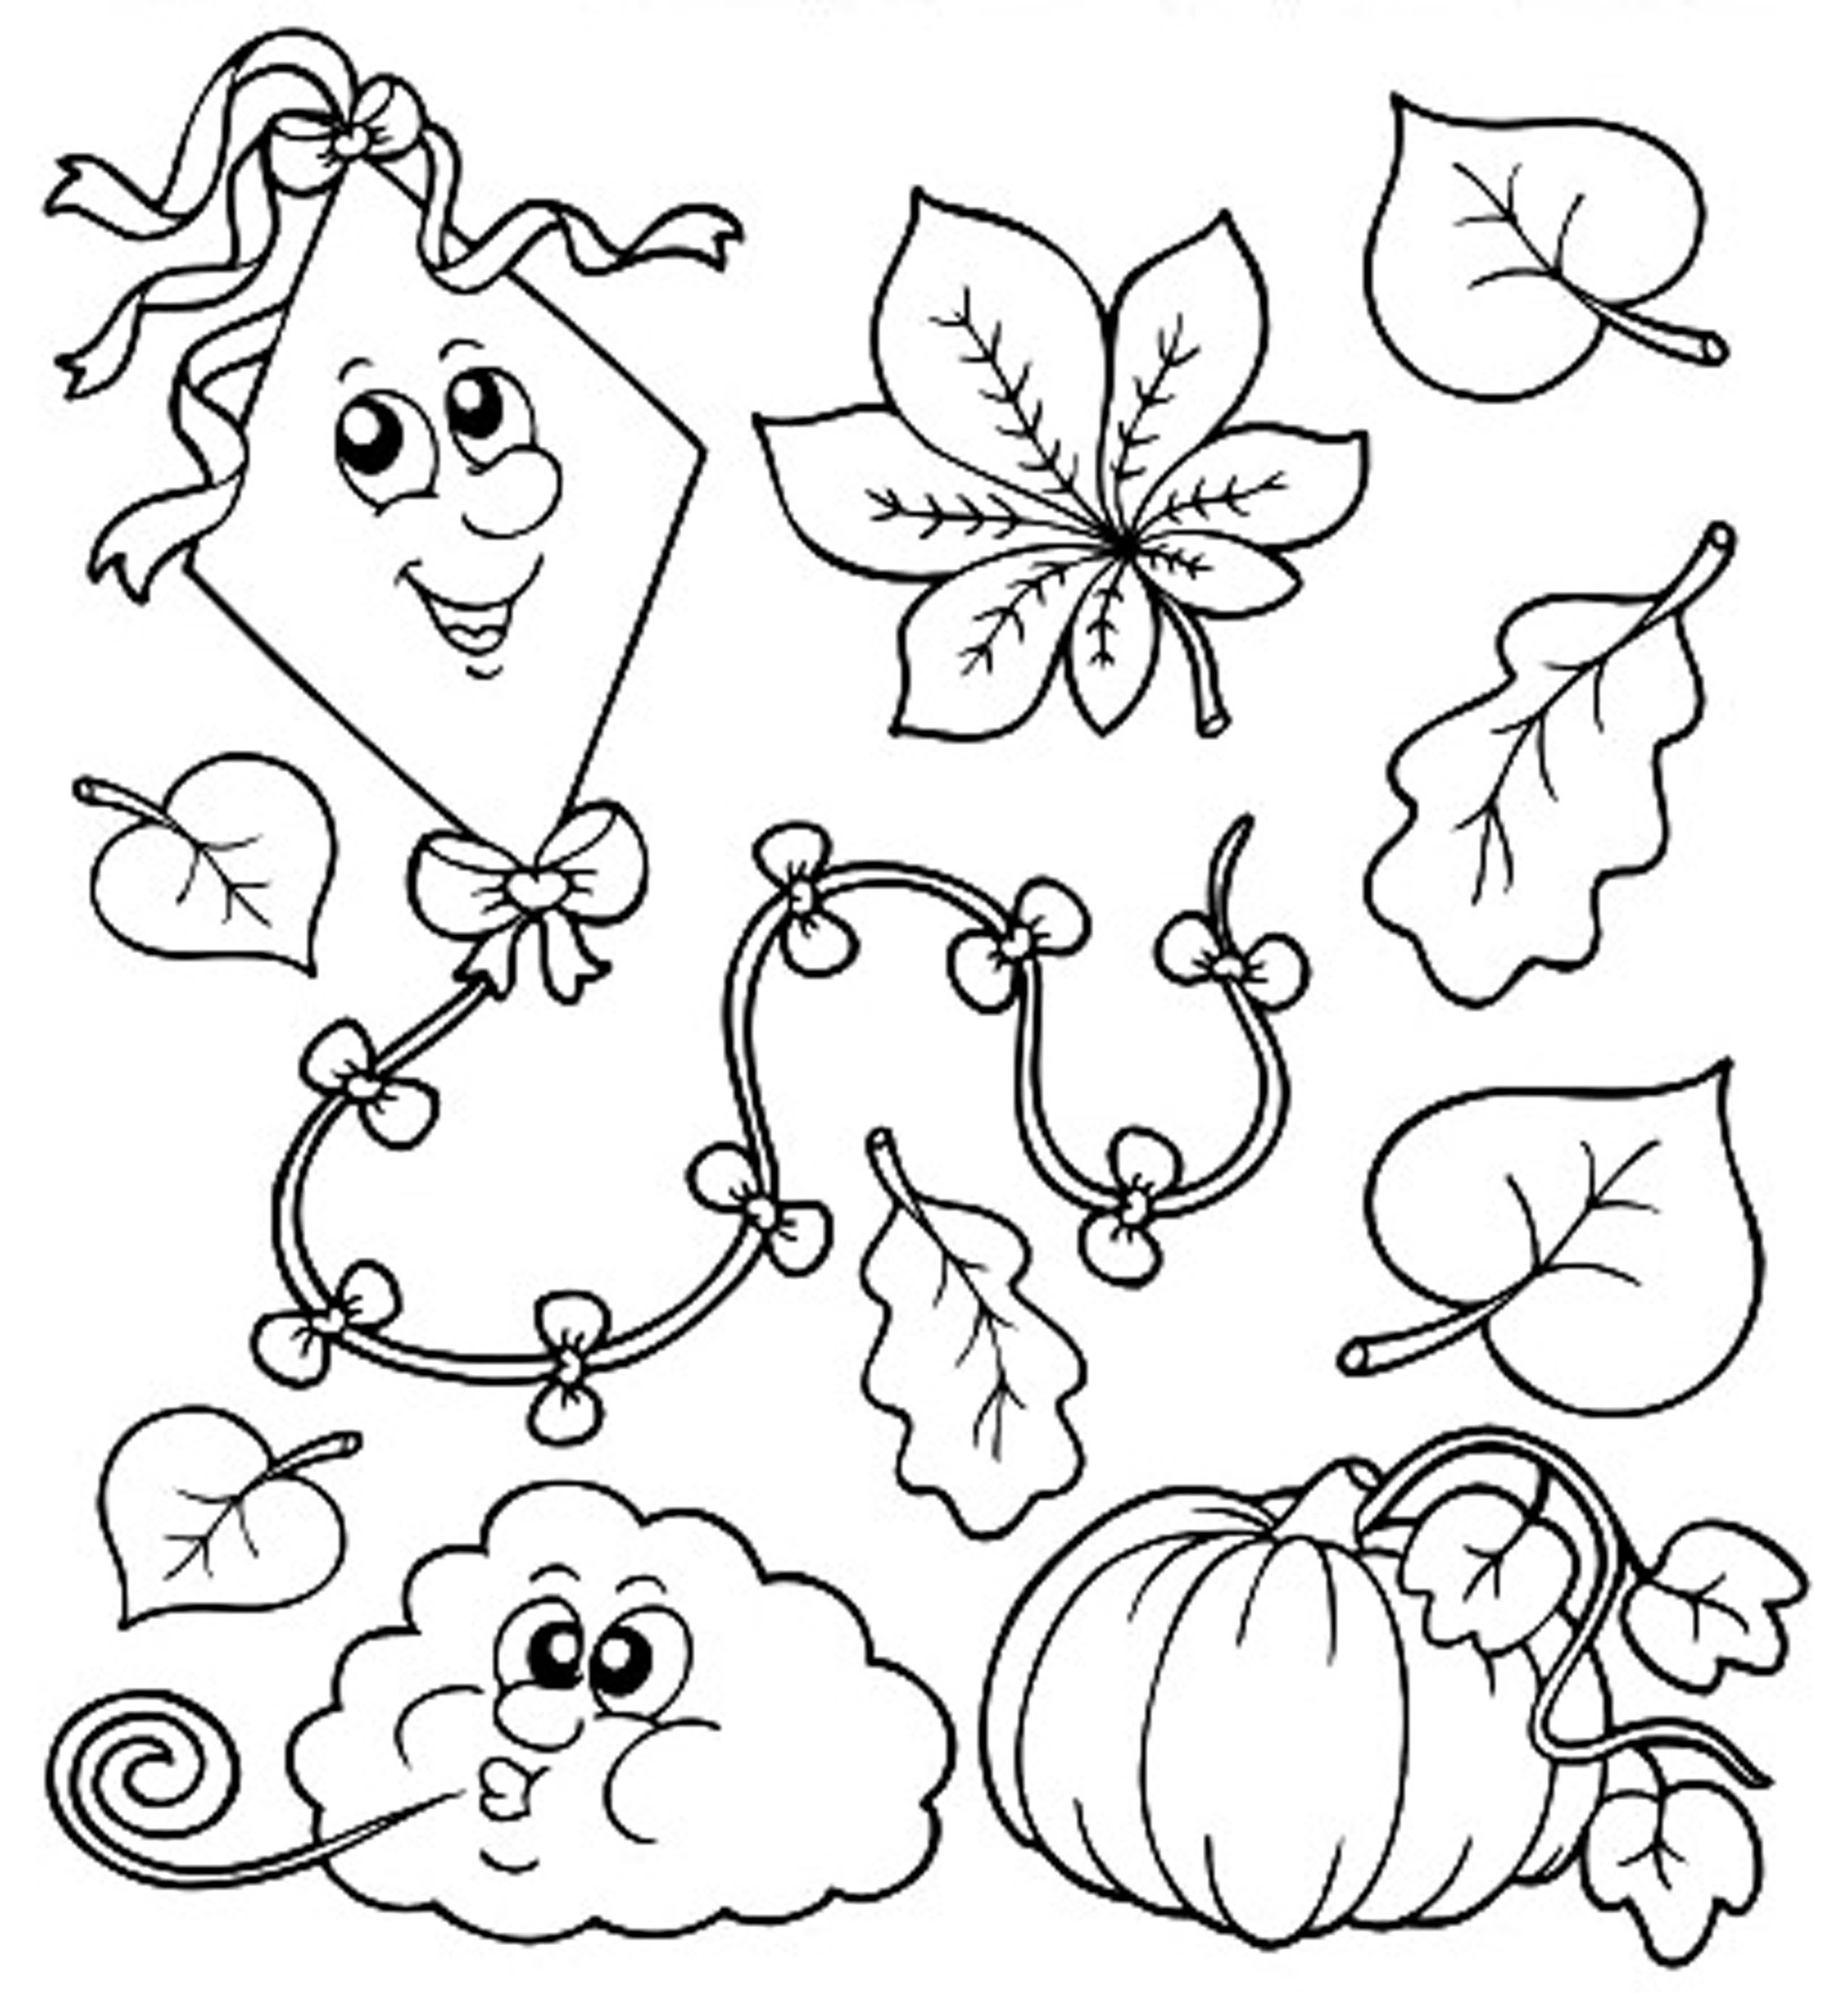 Coloring Pages: 40 Free Printable Coloring Books For Toddlers - Free Printable Coloring Books For Toddlers